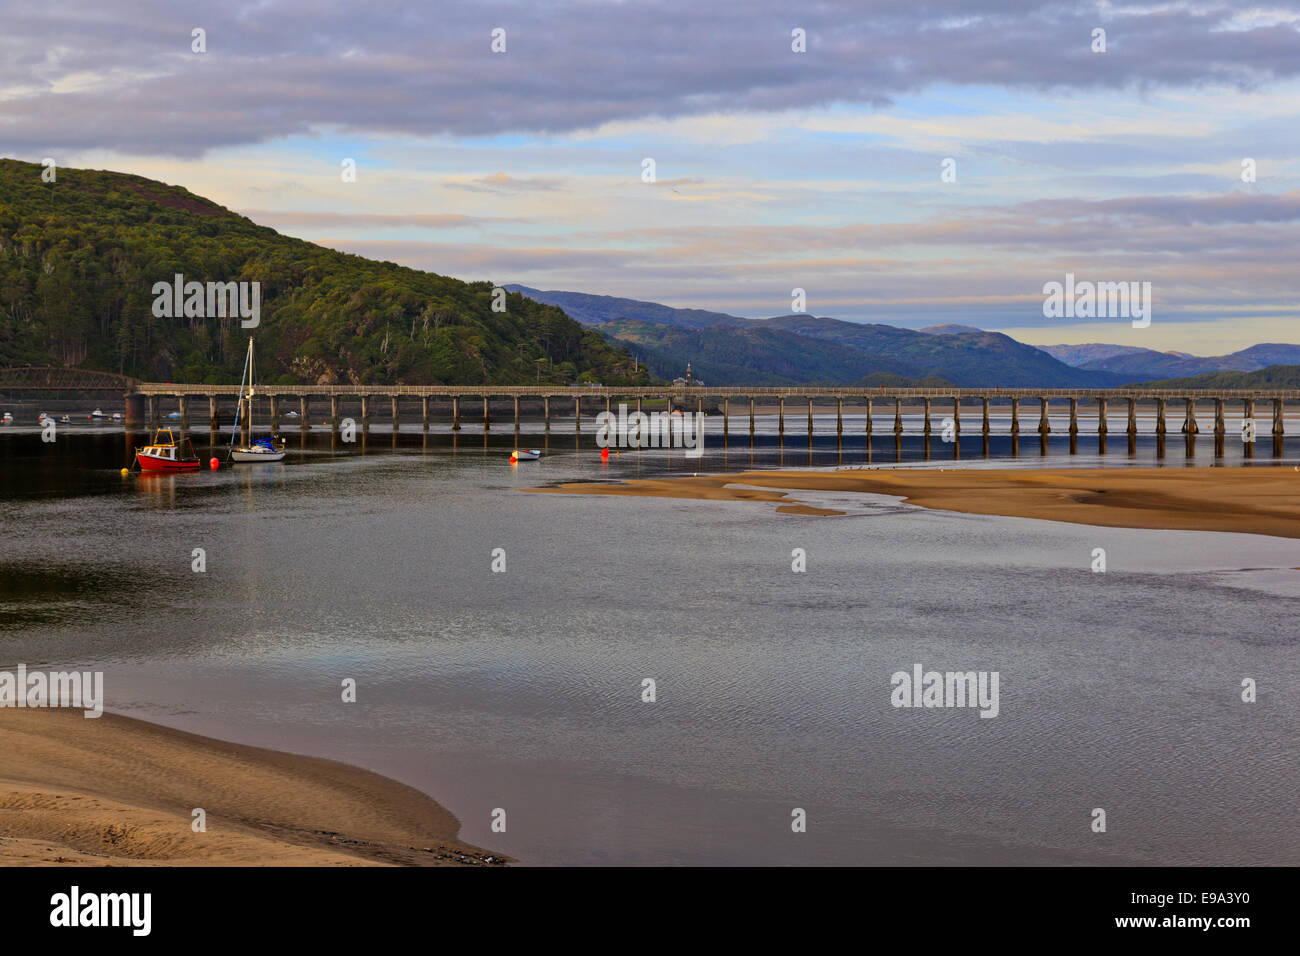 The Railway Bridge crossing the Mawddach Estuary at dusk viewed from Fairbourne Stock Photo